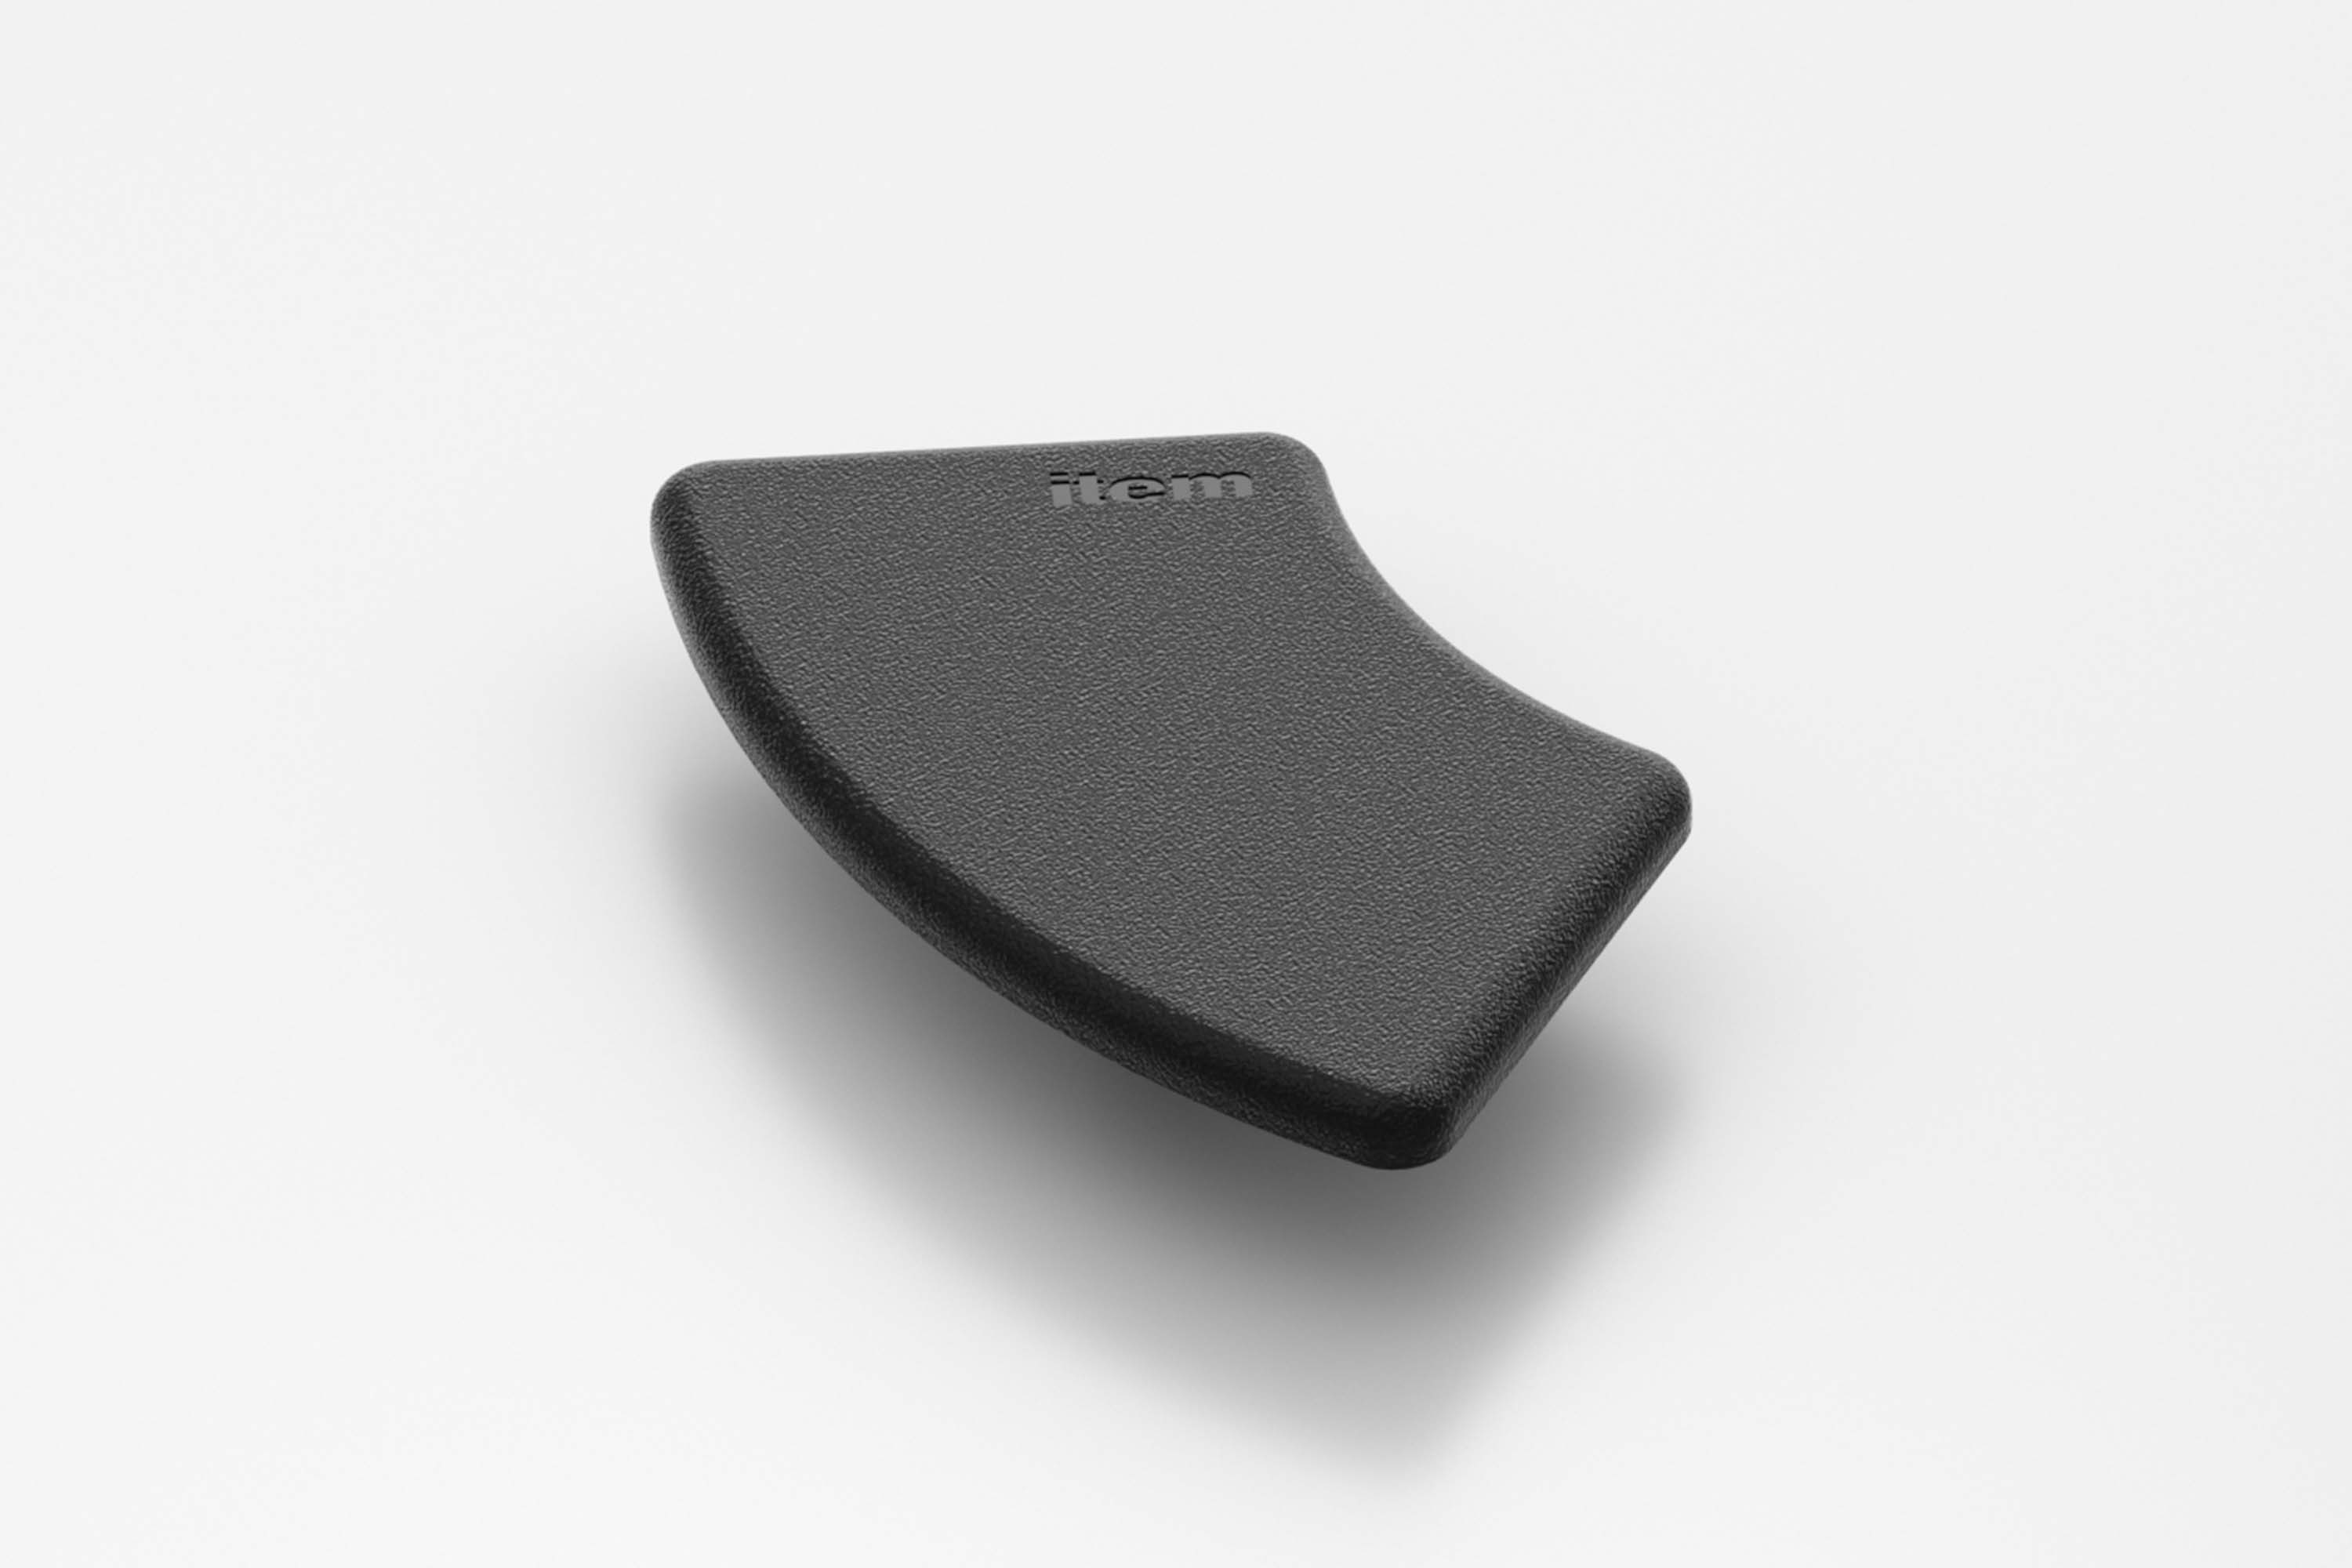 Cap – rounded outer surface